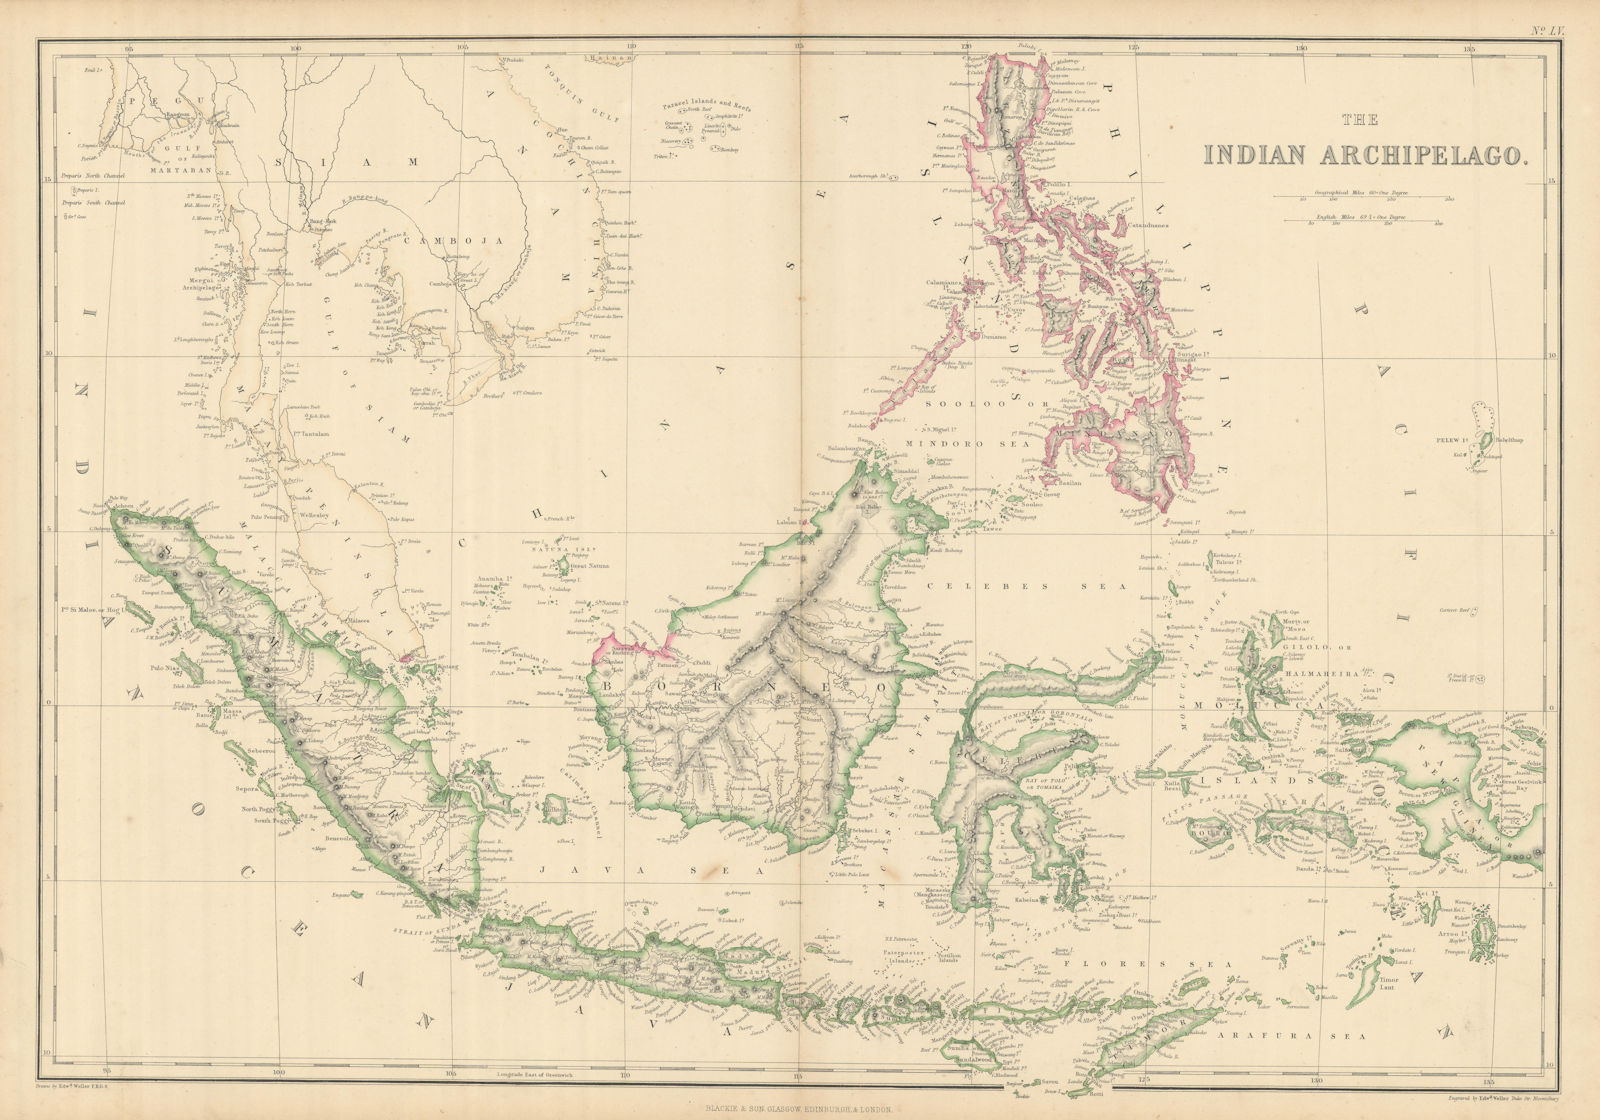 Associate Product The Indian Archipelago. East Indies Indonesia Philippines. WELLER 1860 old map